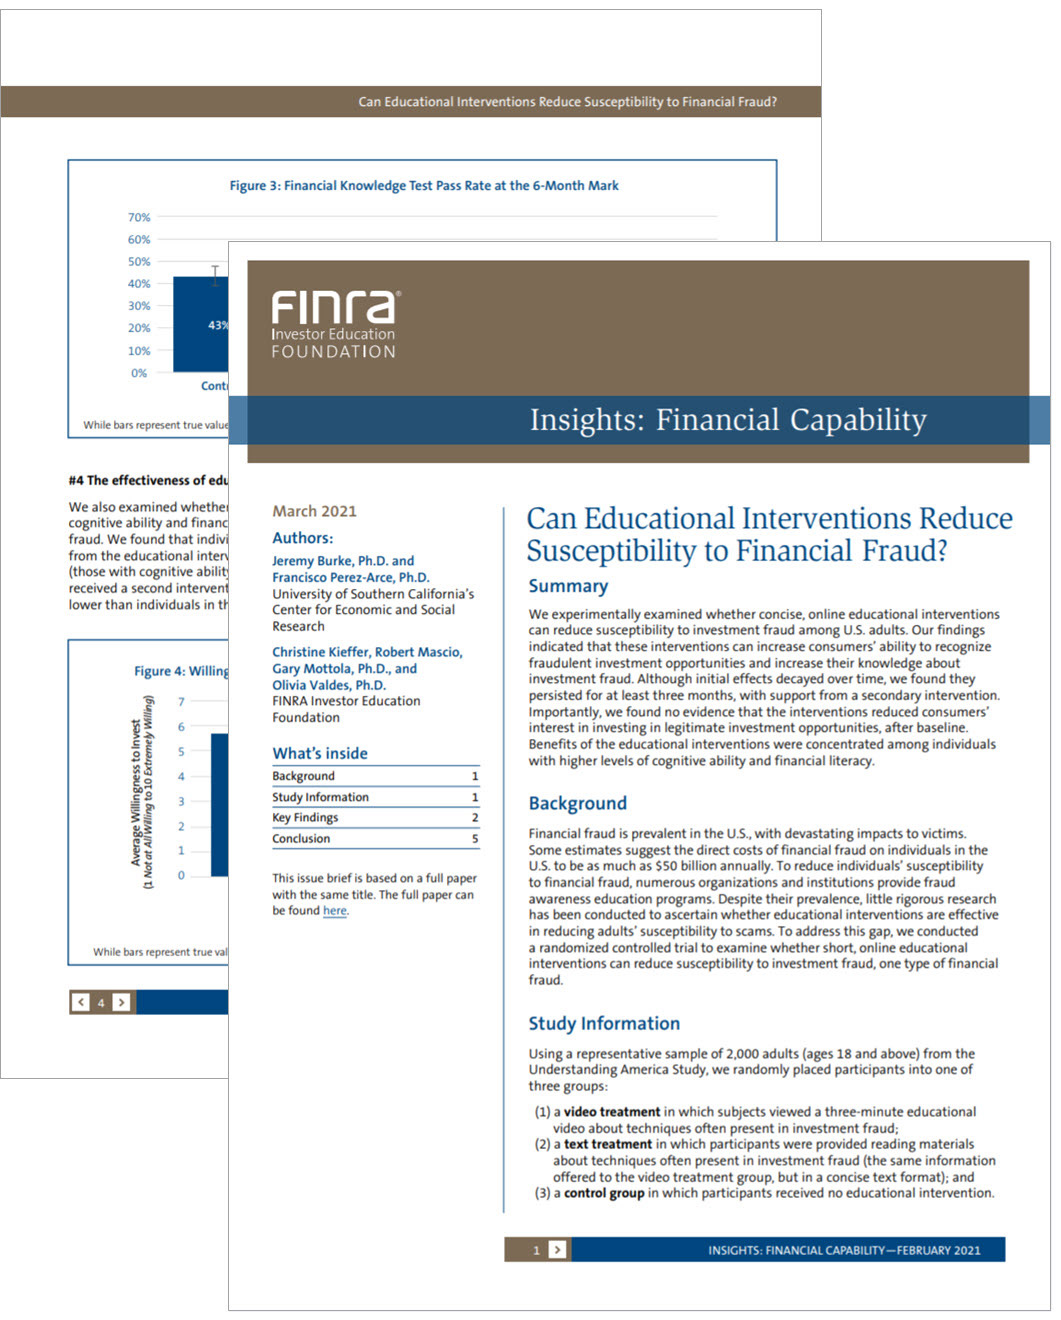 Can Educational Interventions Reduce Susceptibility to Financial Fraud?